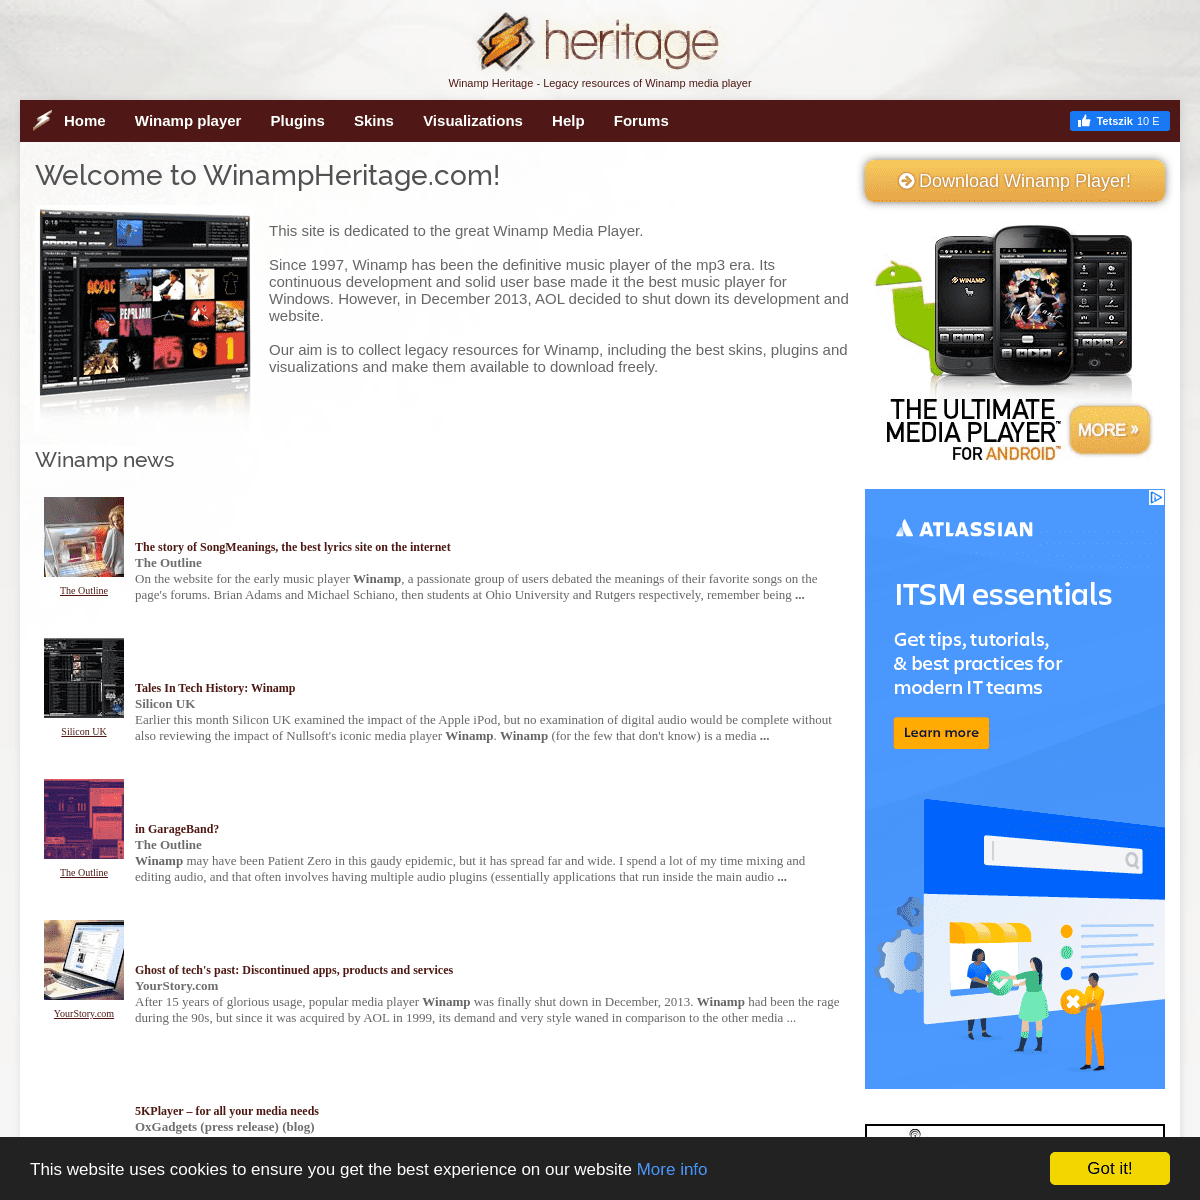 A complete backup of winampheritage.com